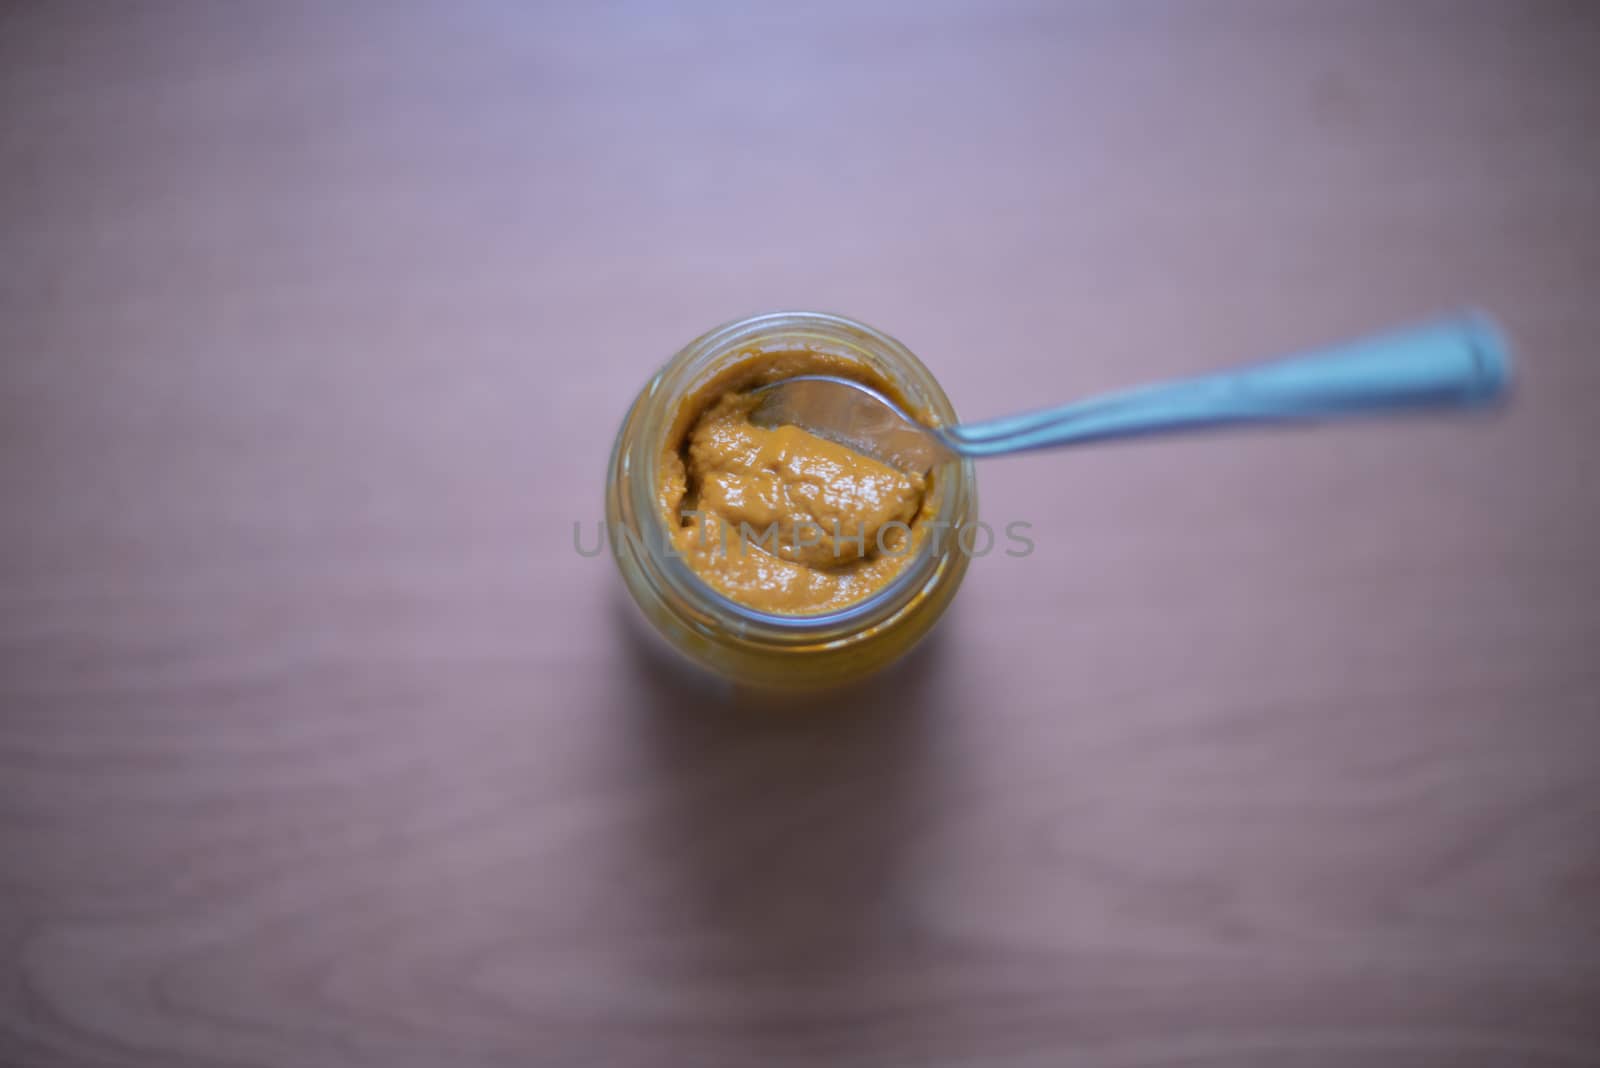 Selective focus of mustard jar with spoon by rushay